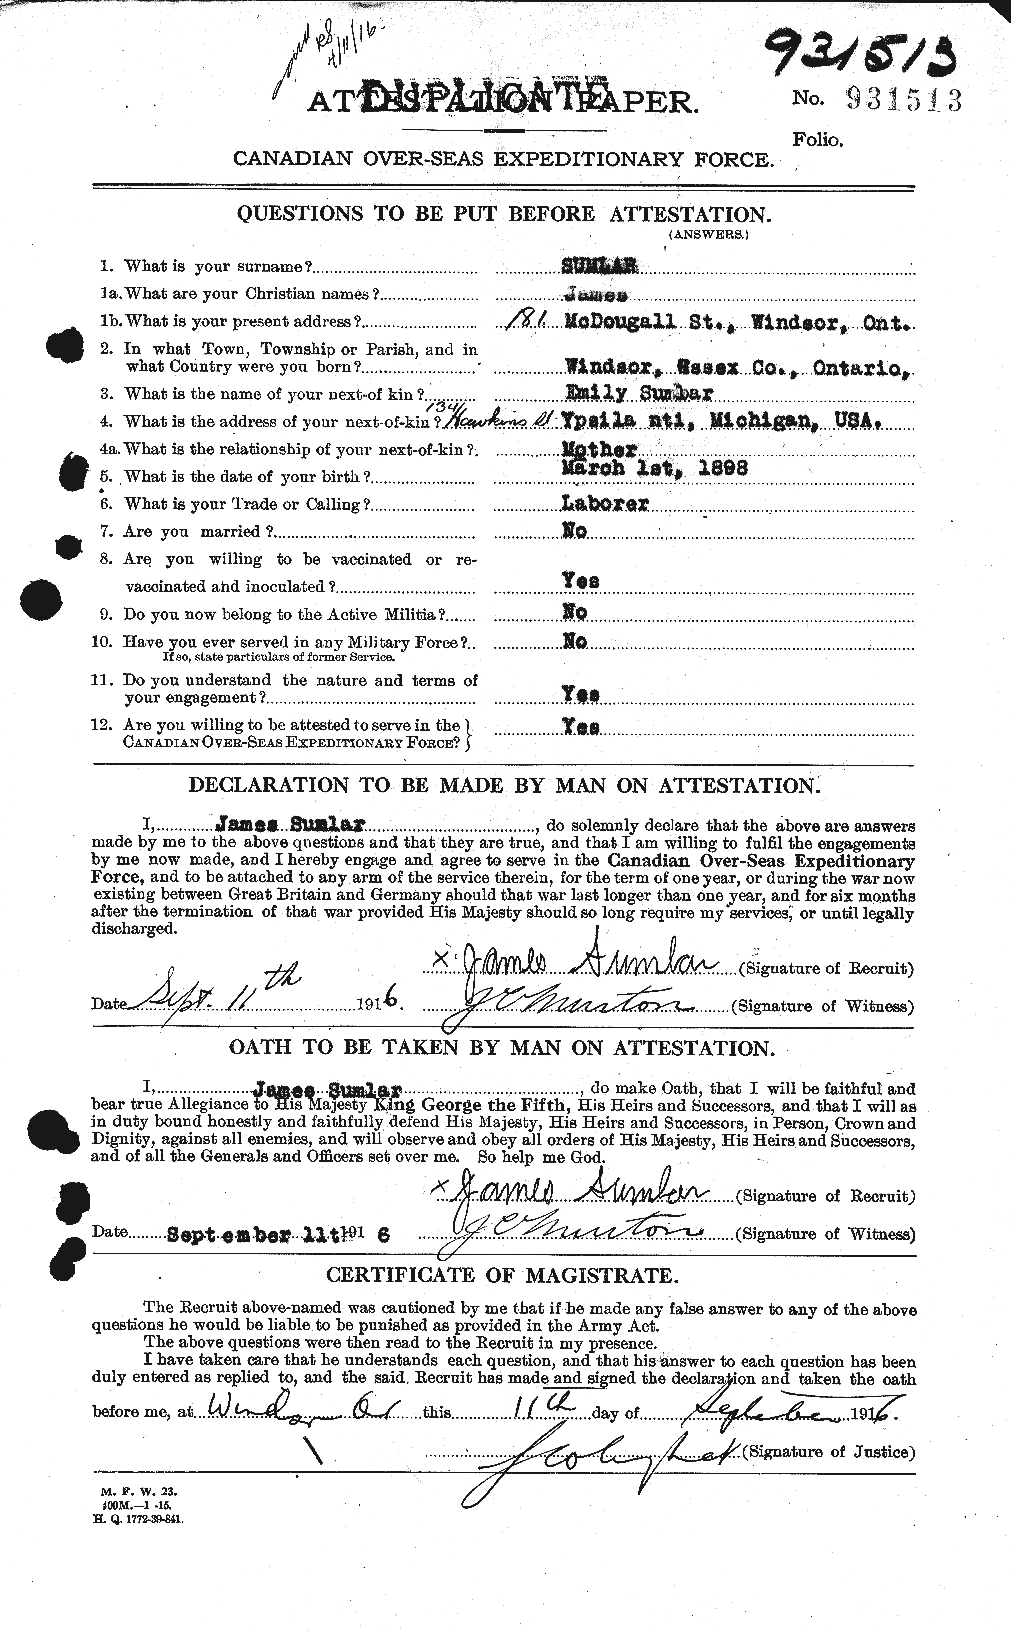 Personnel Records of the First World War - CEF 124067a